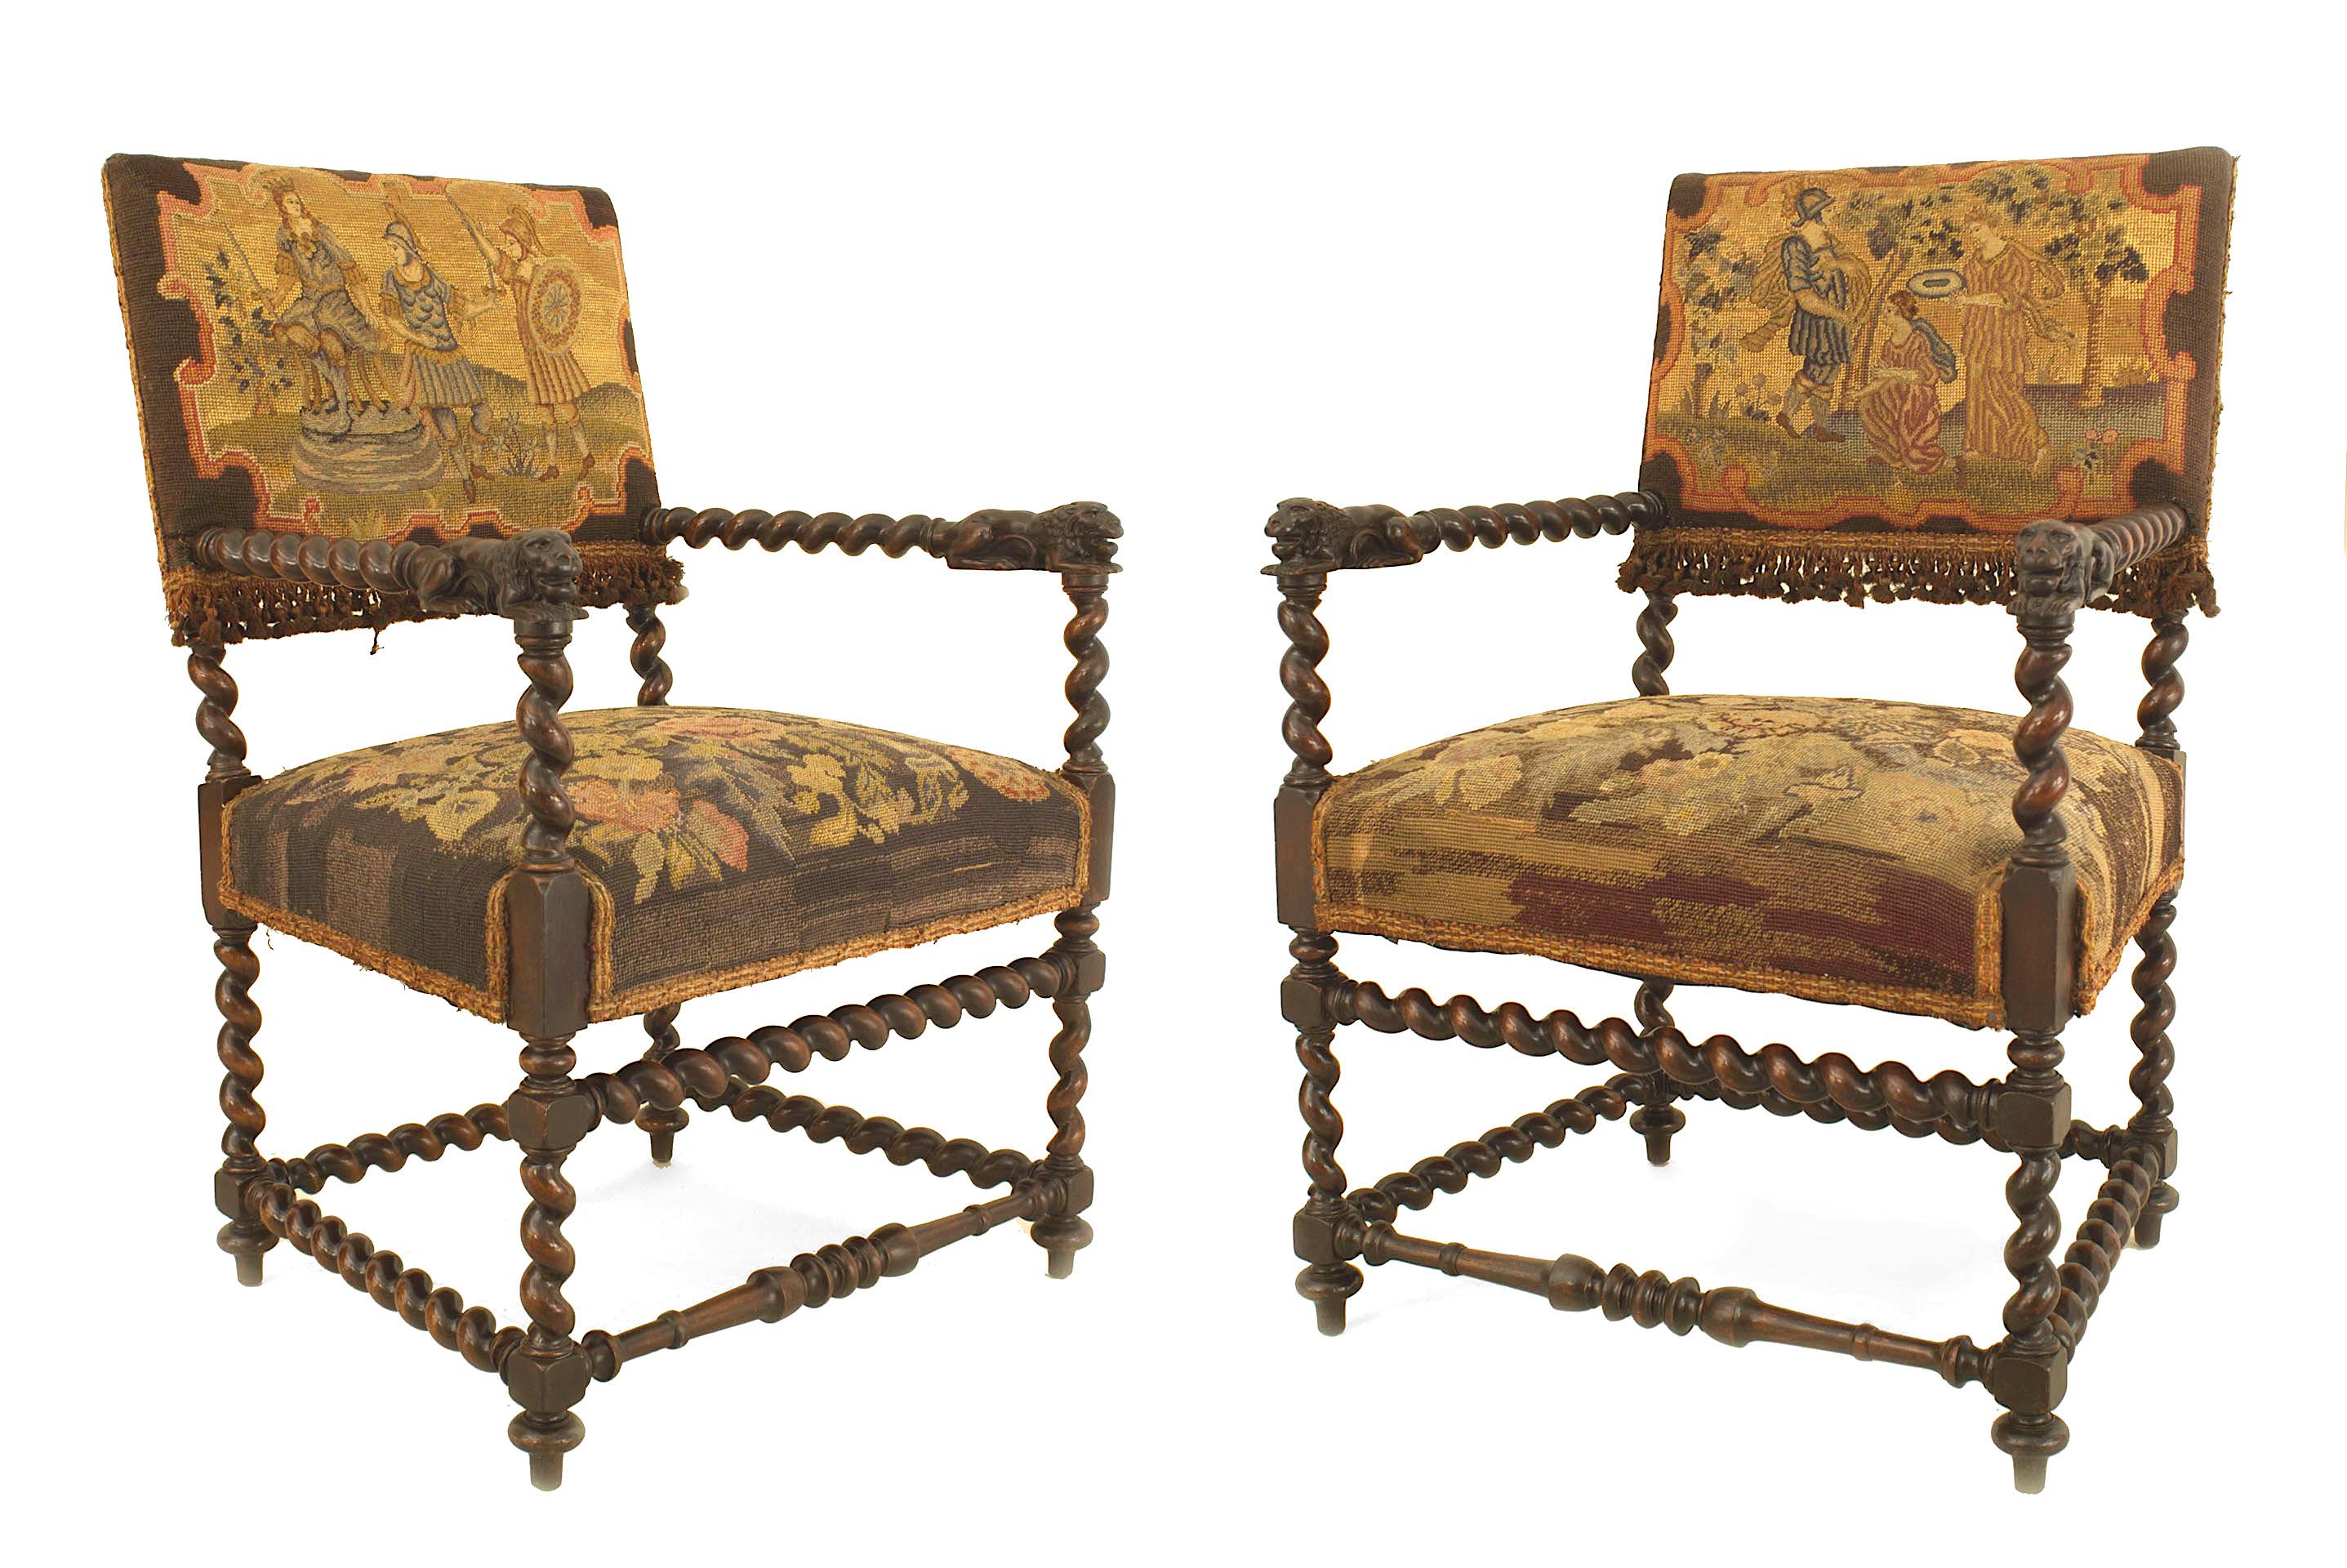 Pair of English Jacobean style (19th century) swirl design walnut armchairs with lion carved arms with a tapestry upholstered seat and back with a box form stretcher.